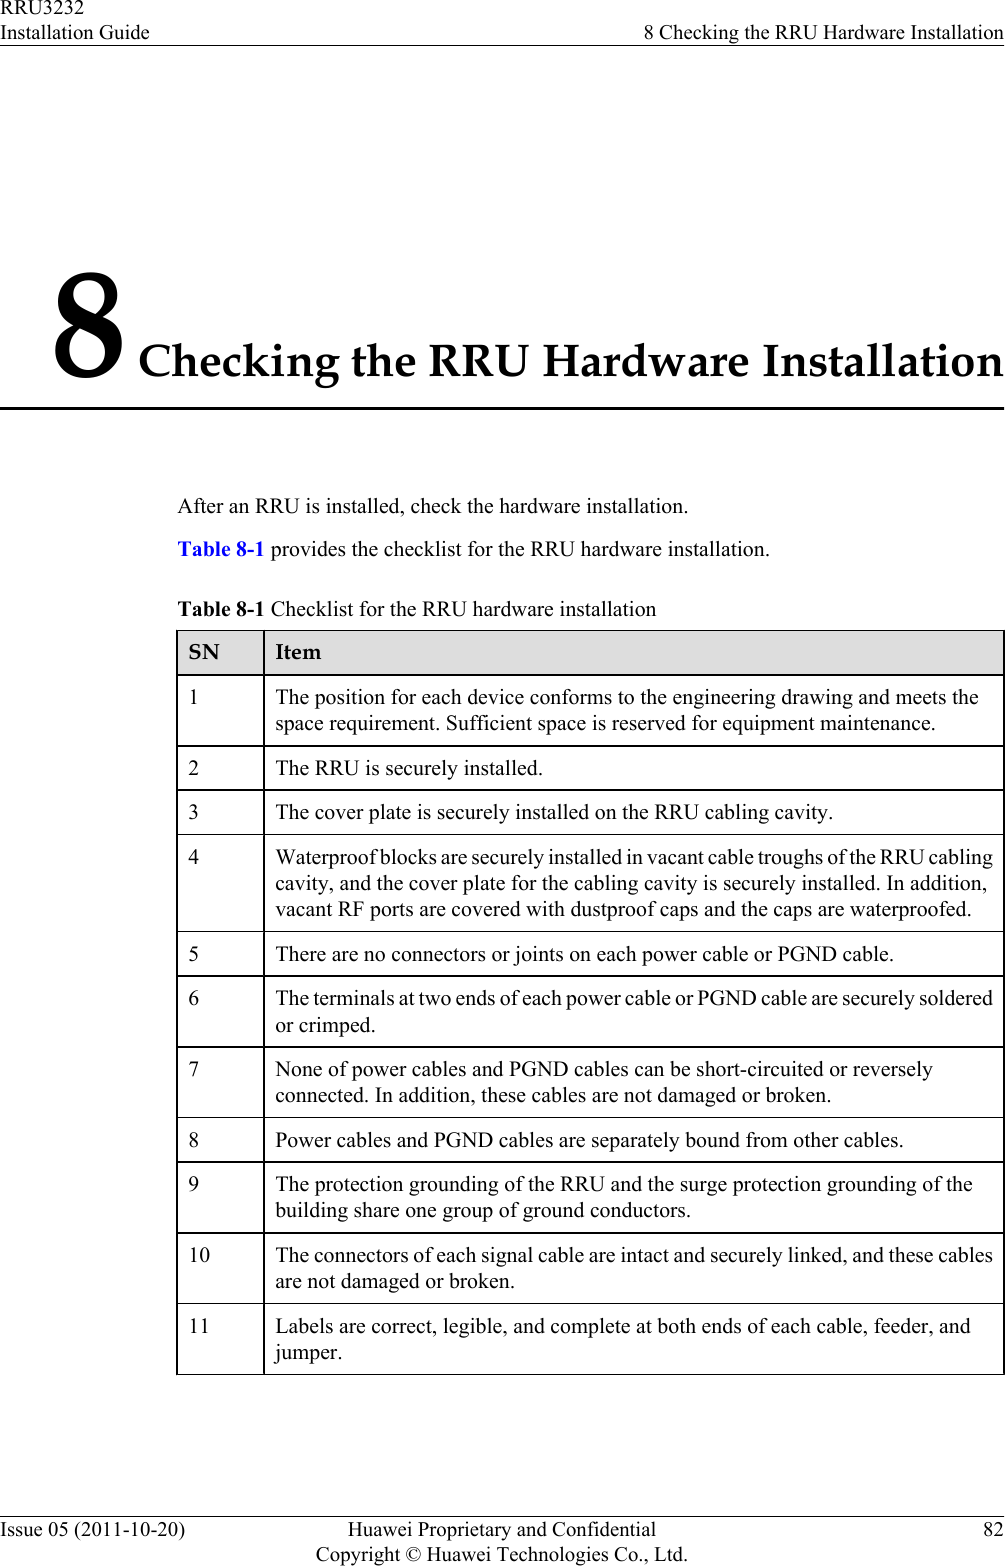 8 Checking the RRU Hardware InstallationAfter an RRU is installed, check the hardware installation.Table 8-1 provides the checklist for the RRU hardware installation.Table 8-1 Checklist for the RRU hardware installationSN Item1The position for each device conforms to the engineering drawing and meets thespace requirement. Sufficient space is reserved for equipment maintenance.2 The RRU is securely installed.3 The cover plate is securely installed on the RRU cabling cavity.4 Waterproof blocks are securely installed in vacant cable troughs of the RRU cablingcavity, and the cover plate for the cabling cavity is securely installed. In addition,vacant RF ports are covered with dustproof caps and the caps are waterproofed.5 There are no connectors or joints on each power cable or PGND cable.6 The terminals at two ends of each power cable or PGND cable are securely solderedor crimped.7 None of power cables and PGND cables can be short-circuited or reverselyconnected. In addition, these cables are not damaged or broken.8 Power cables and PGND cables are separately bound from other cables.9 The protection grounding of the RRU and the surge protection grounding of thebuilding share one group of ground conductors.10 The connectors of each signal cable are intact and securely linked, and these cablesare not damaged or broken.11 Labels are correct, legible, and complete at both ends of each cable, feeder, andjumper.RRU3232Installation Guide 8 Checking the RRU Hardware InstallationIssue 05 (2011-10-20) Huawei Proprietary and ConfidentialCopyright © Huawei Technologies Co., Ltd.82